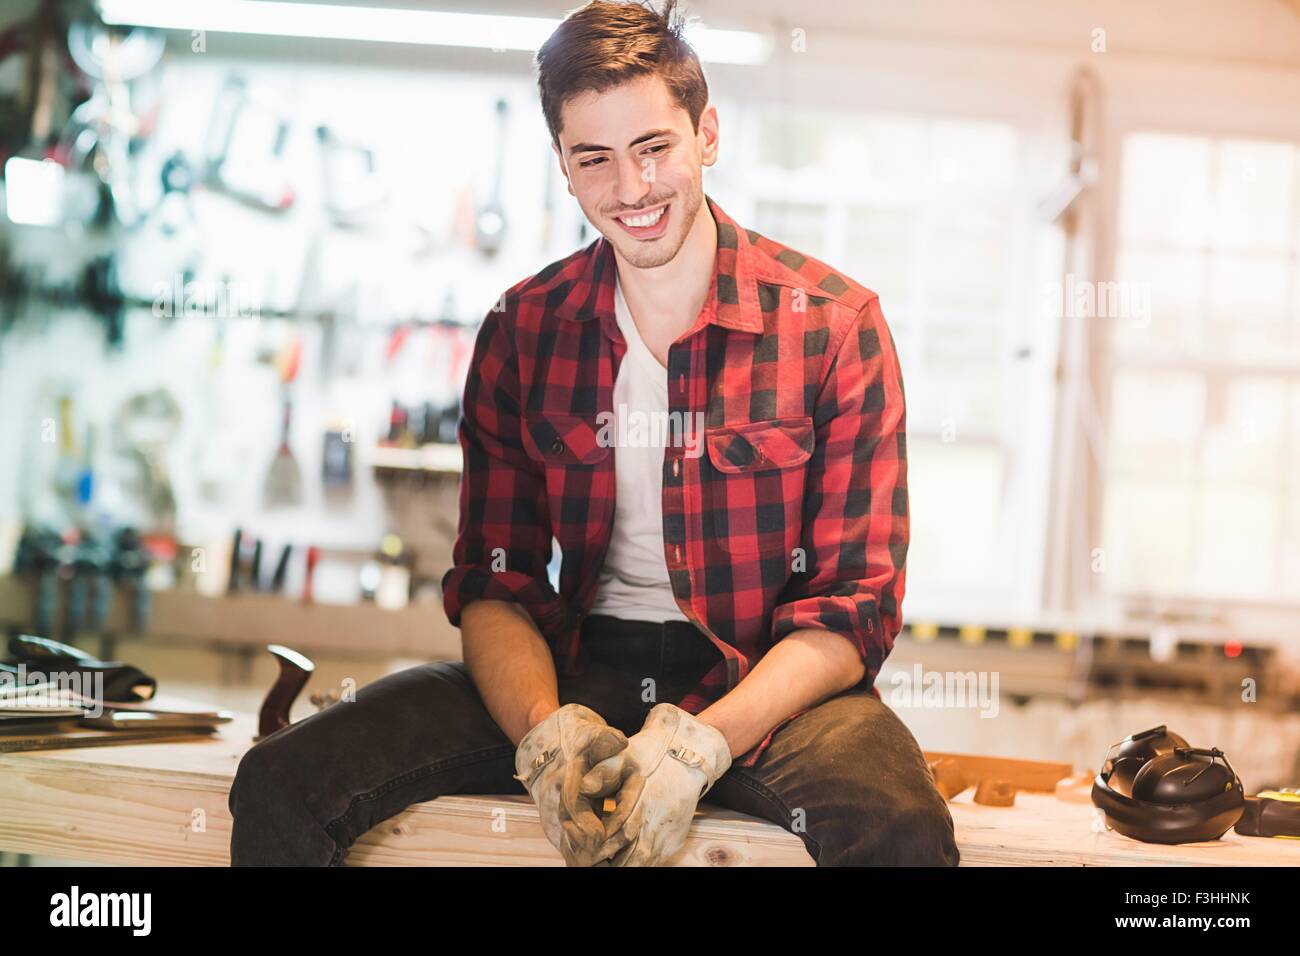 Young man sitting on workbench wearing protective gloves, looking away smiling Stock Photo